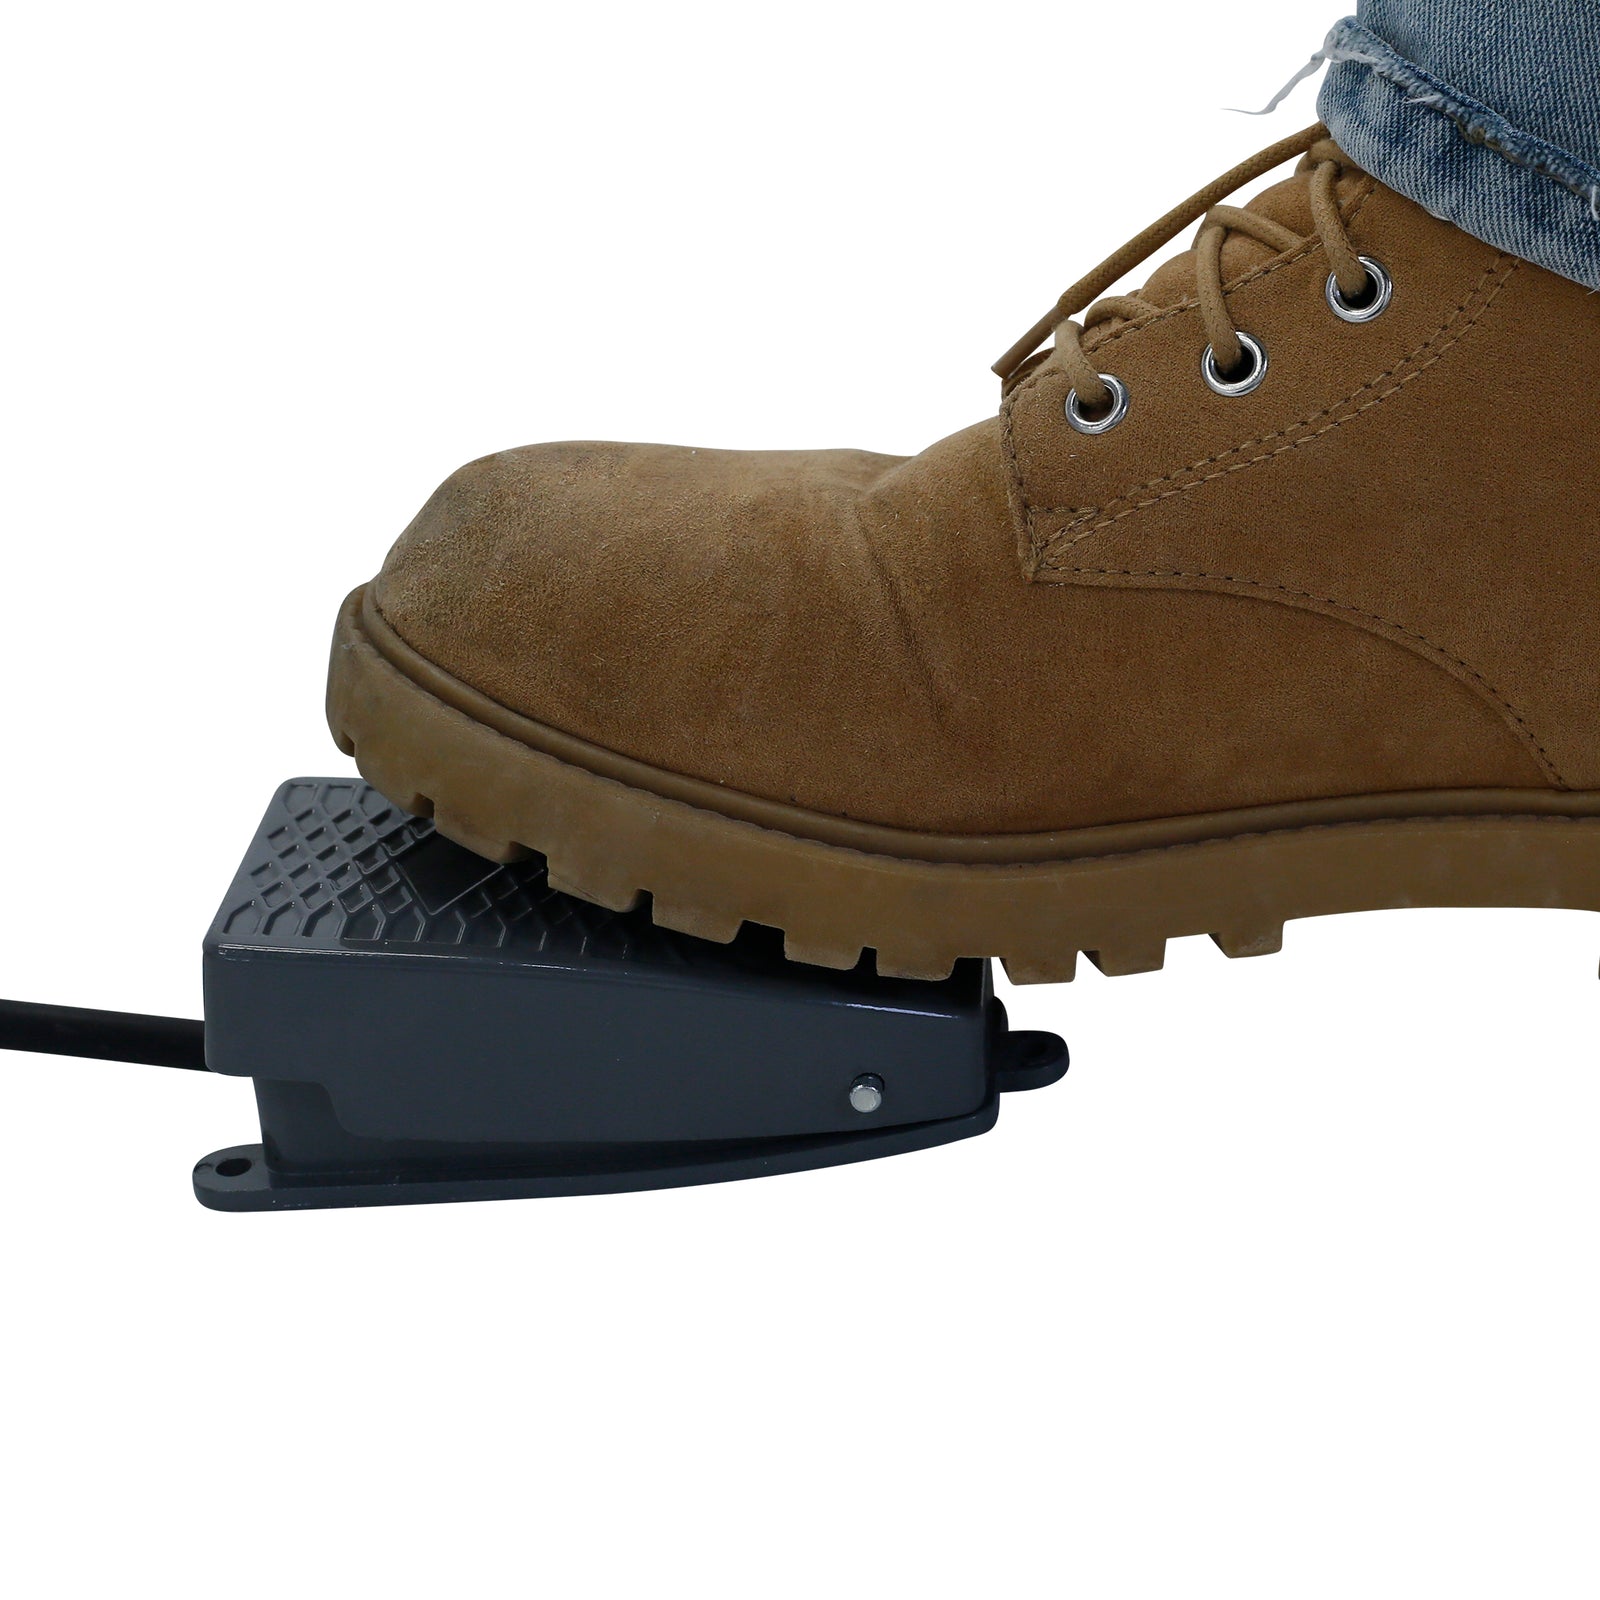 Close up of the ark grey pedal belonging to a JORESTECH linear weighing machine. A person wearing brown boots and jeans can be seen pressing down on the pedal to signal the machine to initiate a dispensing cycle